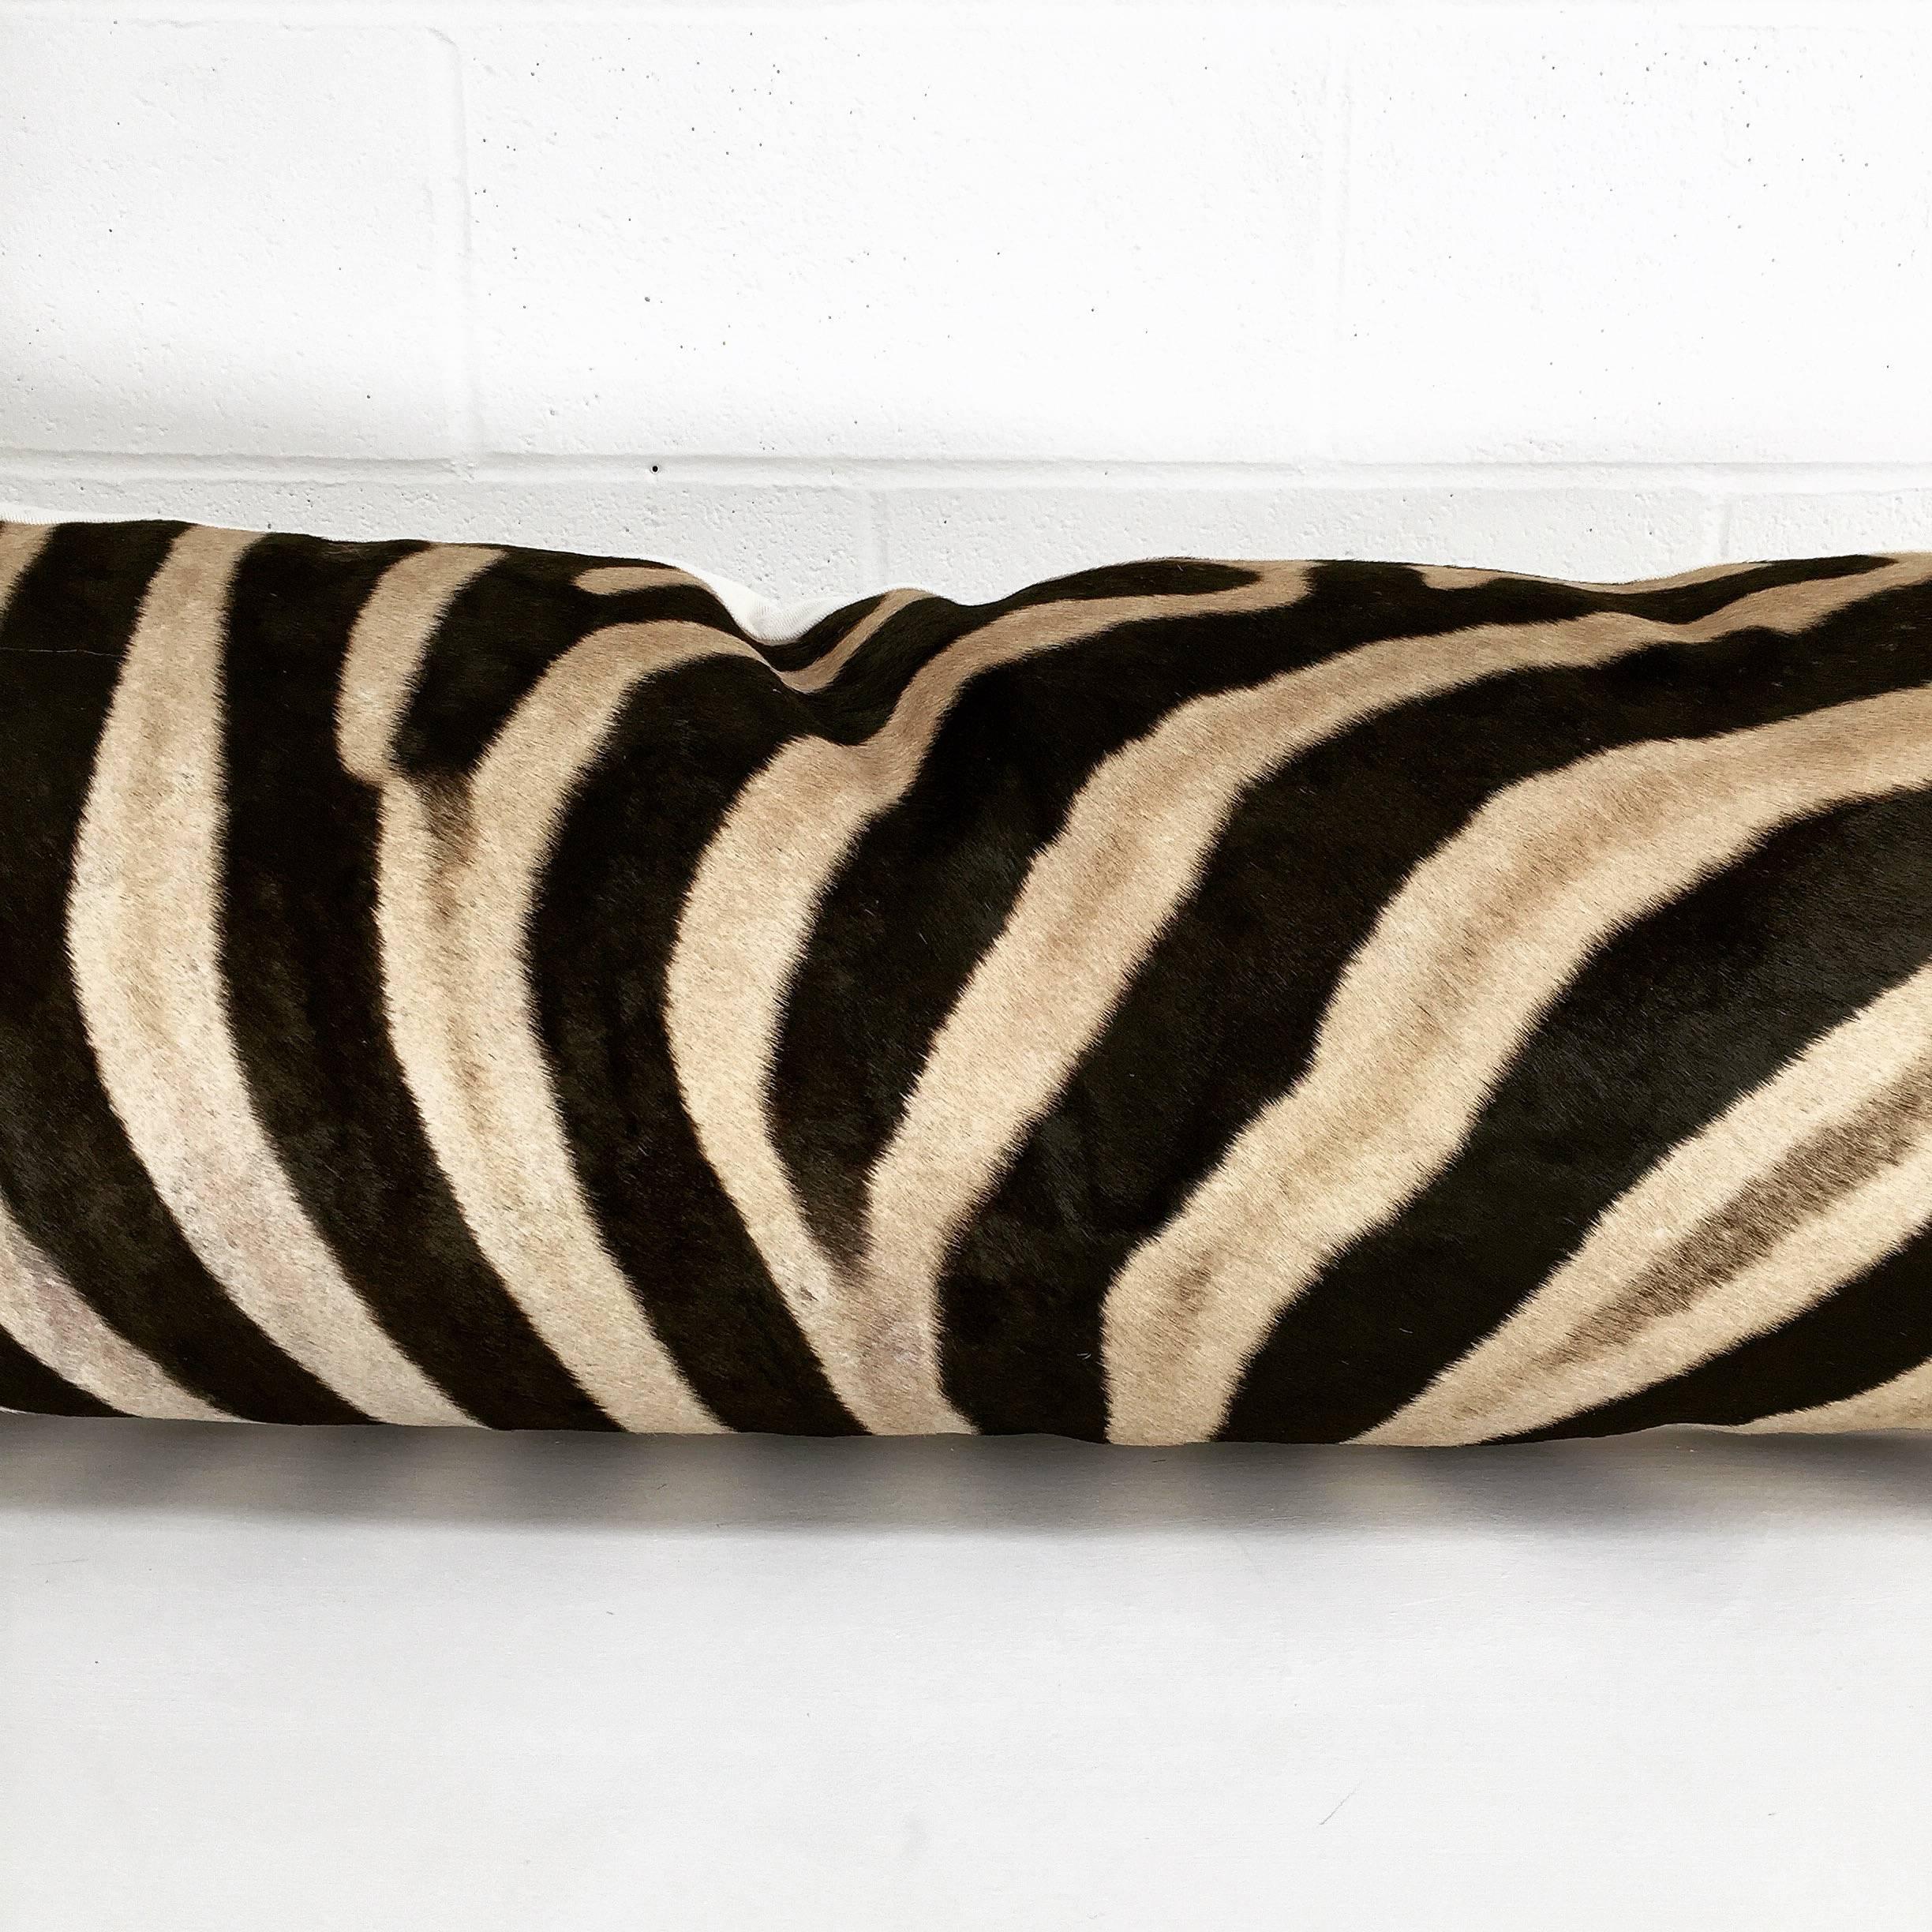 Our Luxury King Pillow makes a show-stopping statement on a couch or an incredibly luxurious feel on the bed. Our Forsyth craftsmen use a single hide for this beautiful pillow. The zebra hide is finished with our ivory cotton canvas backing and an